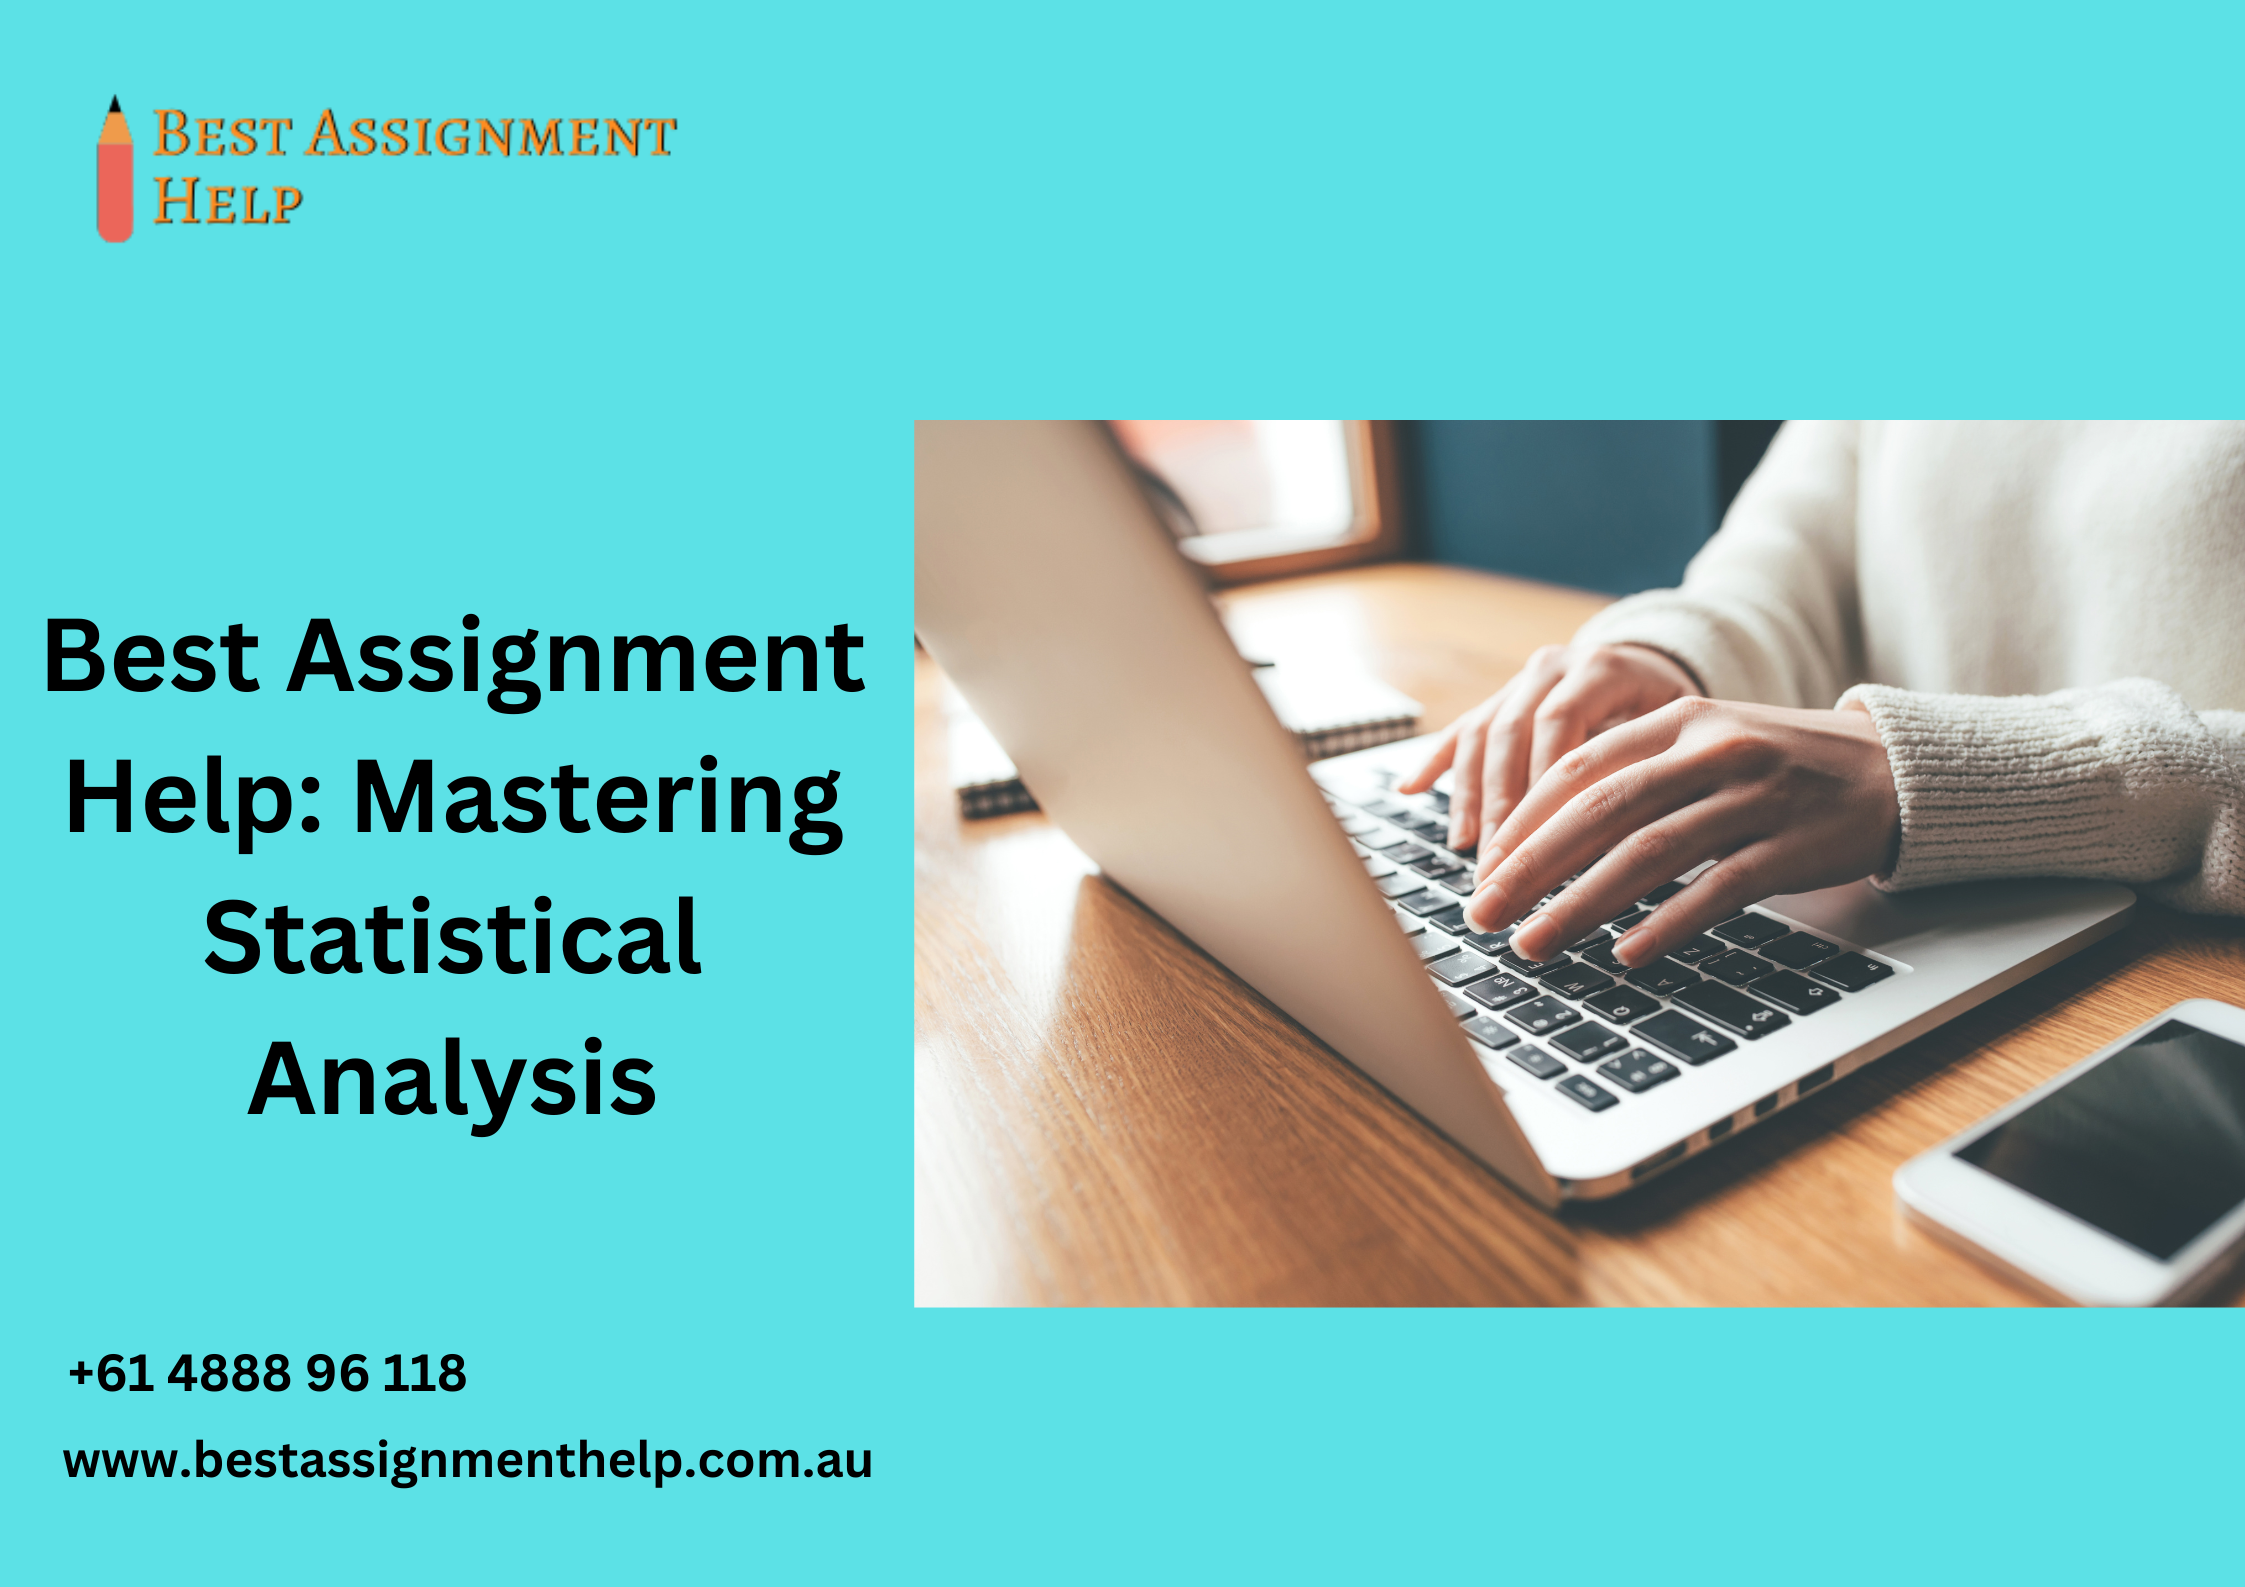 Best Assignment Help: Mastering Statistical Analysis